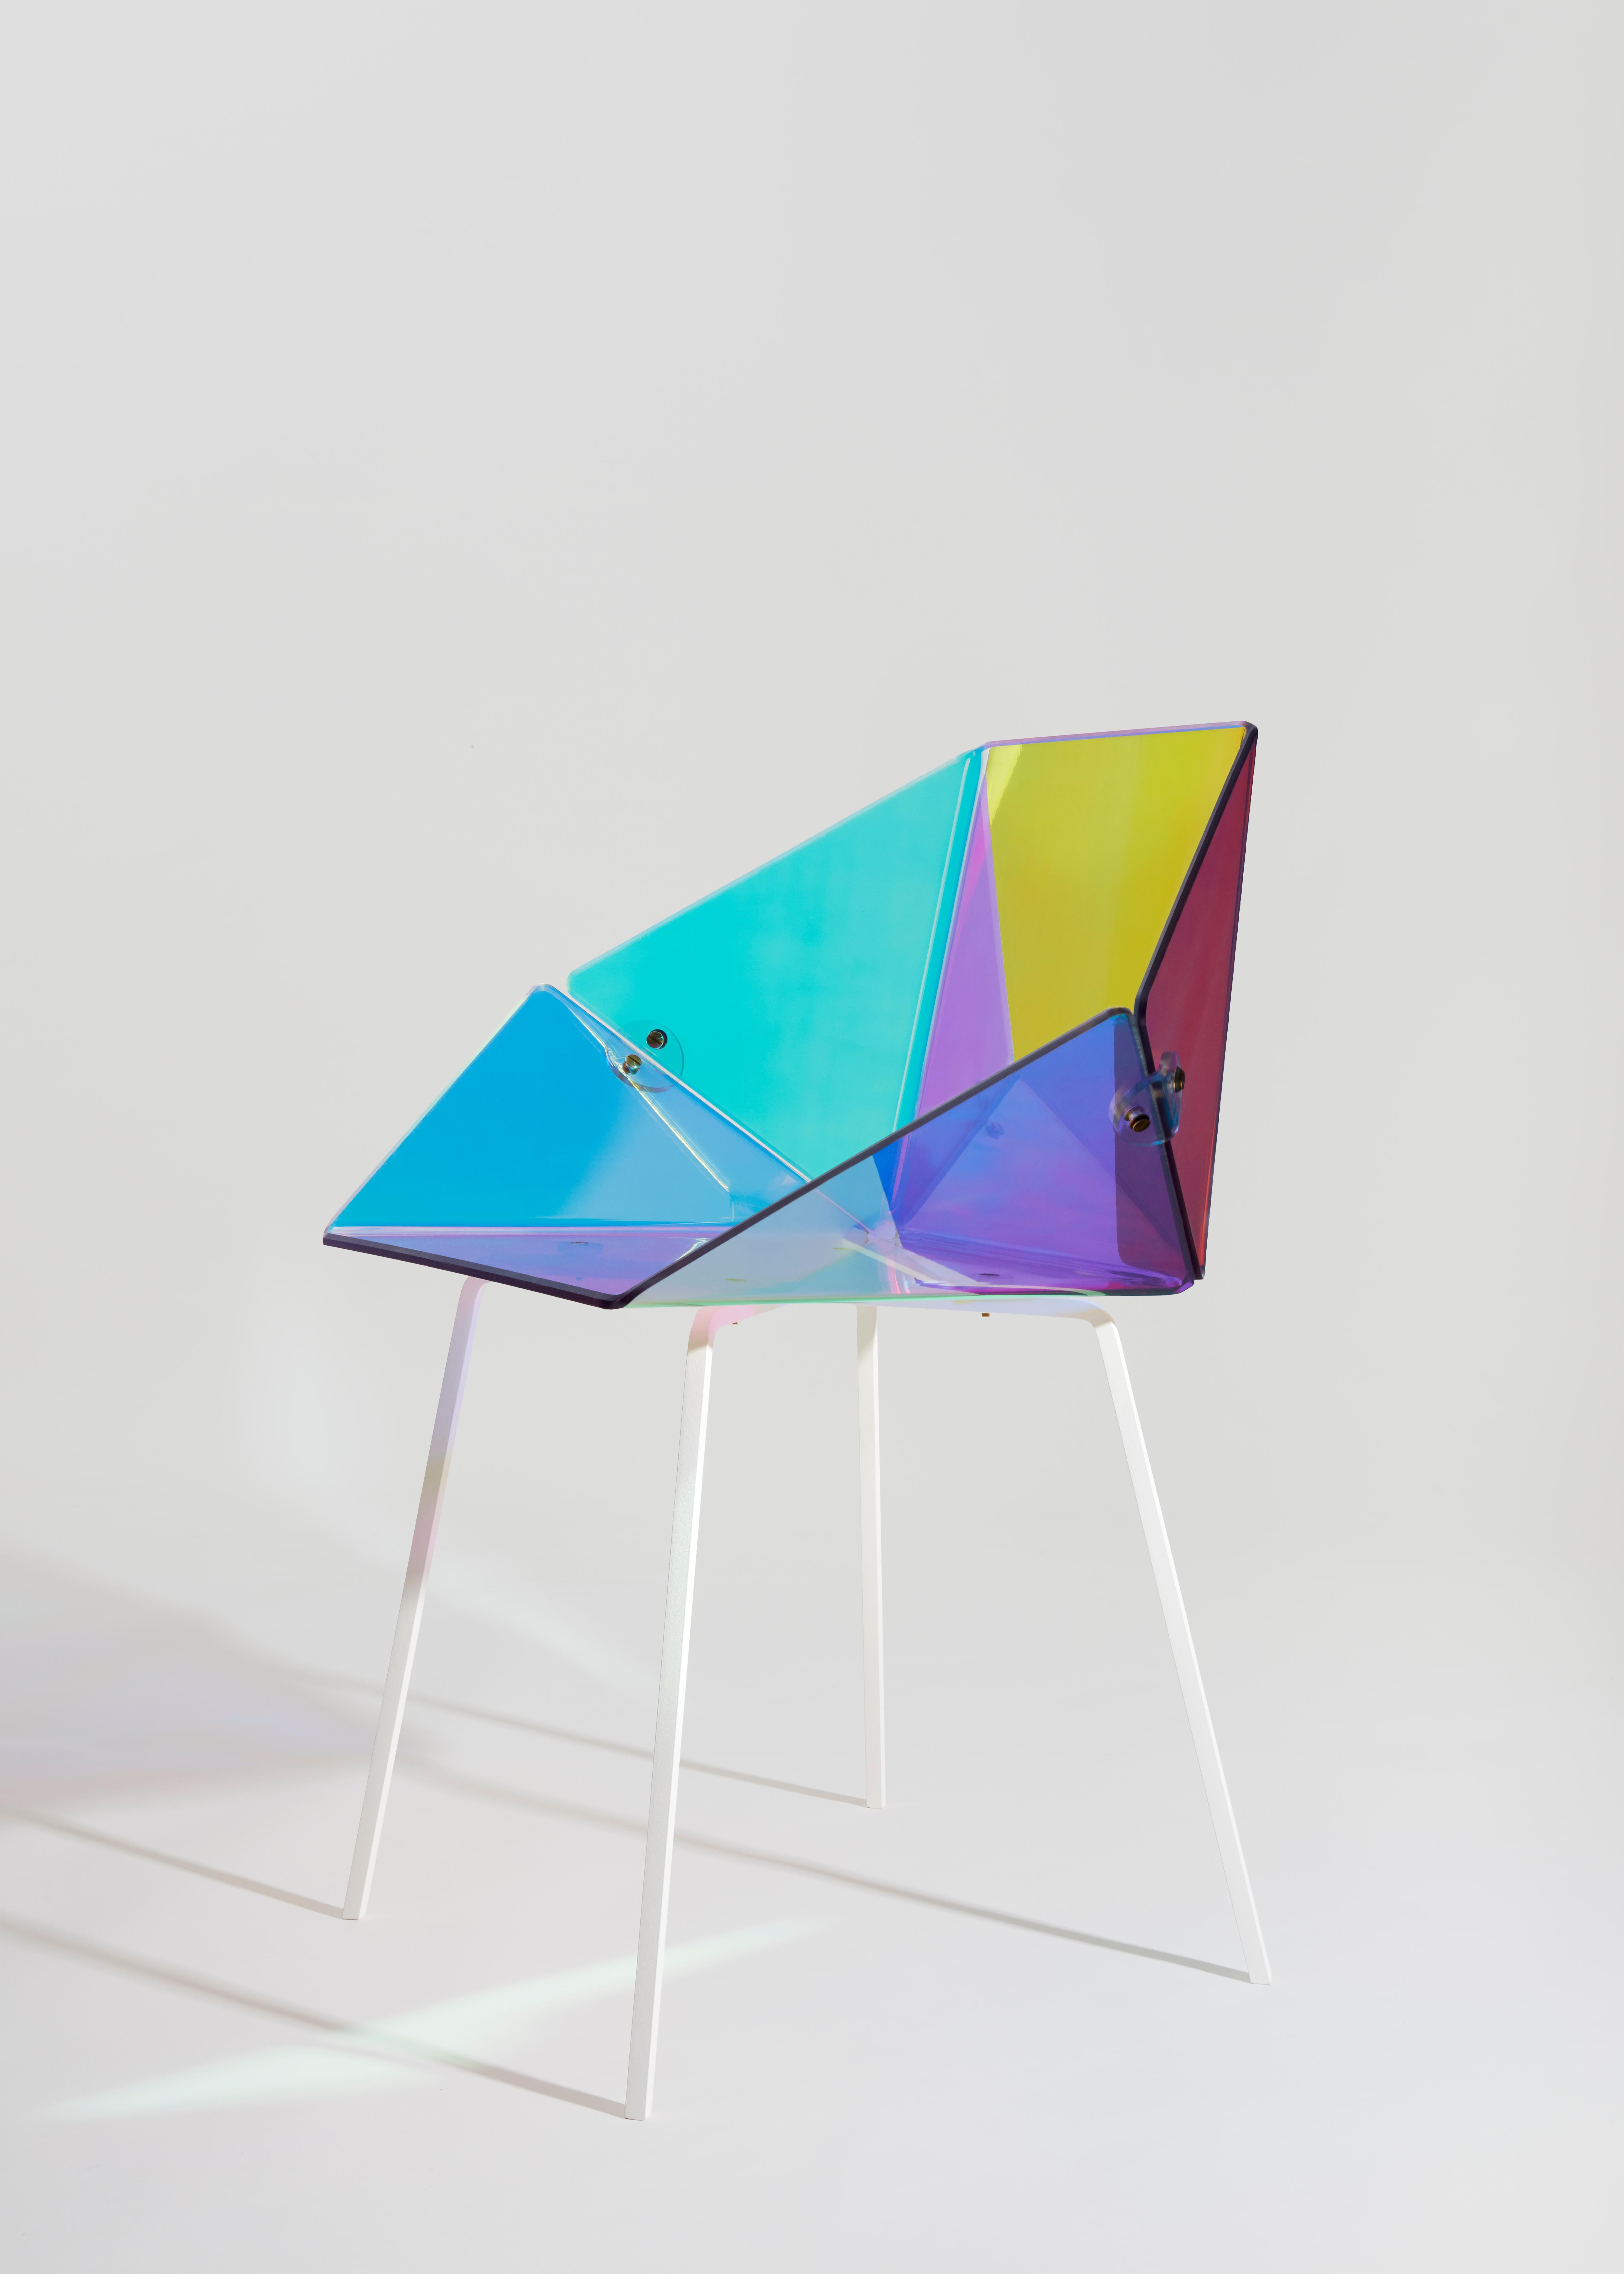 Prismania chair signed by Elise Luttik
Dimensions: D 48.5 x W 70 x H 79 cm
Materials: Polycarbonate transparent shell with a prismatic polyester film, steel, epoxy.
Also available with black base.

The transparent Prismania chair is both an artefact